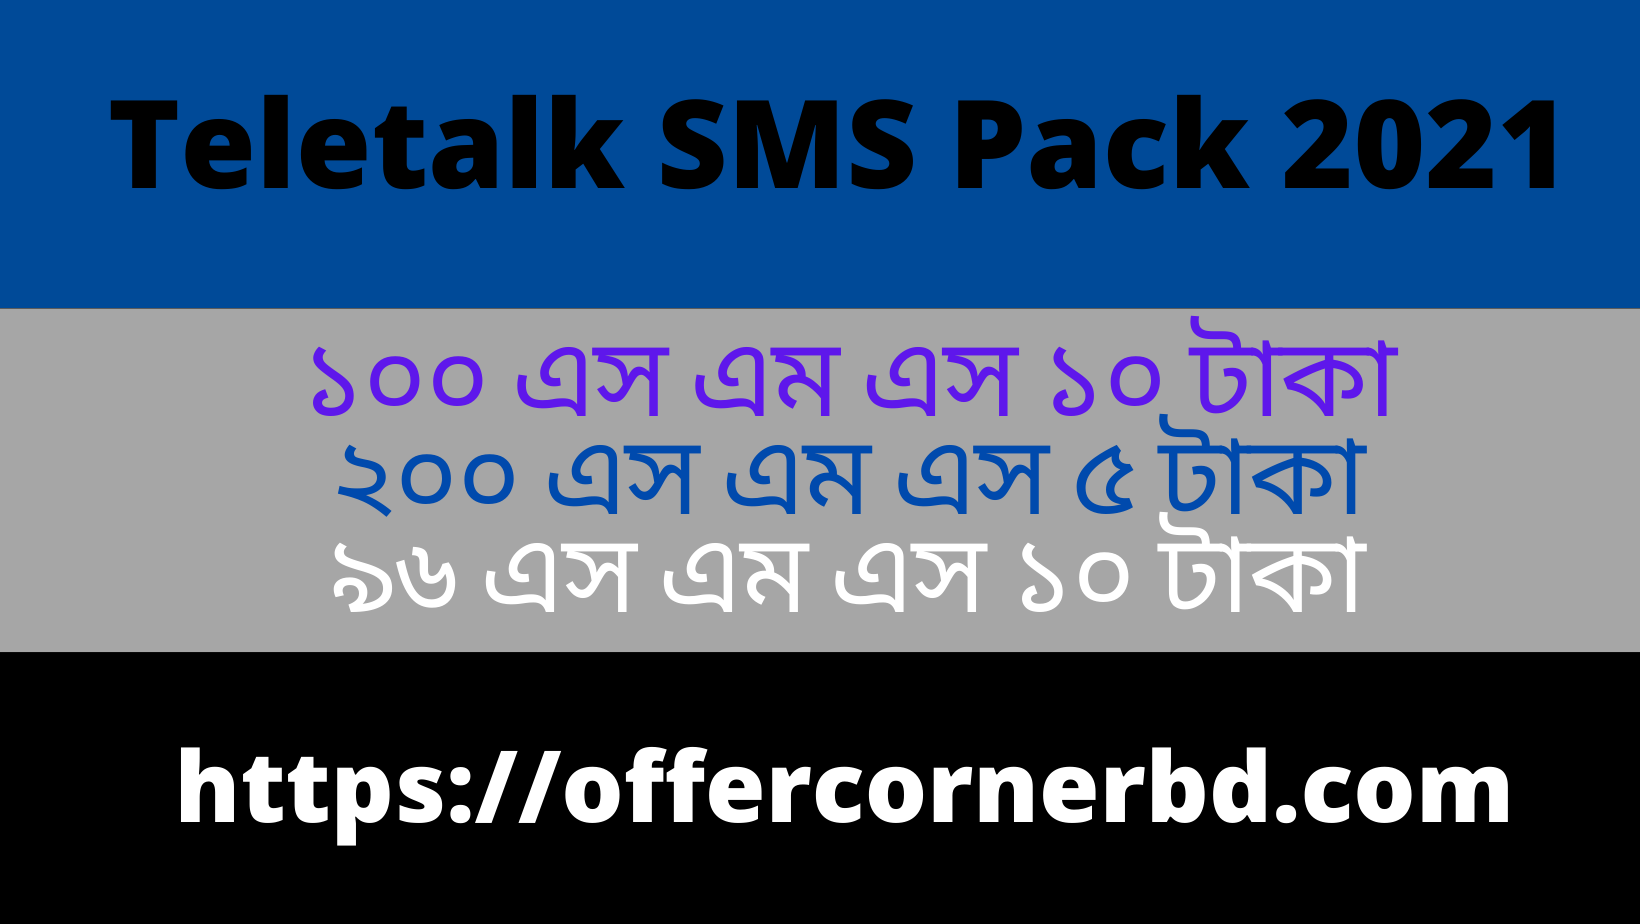 Read more about the article Teletalk SMS Pack 2021 new offer | টেলিটক এস এম এস প্যাক